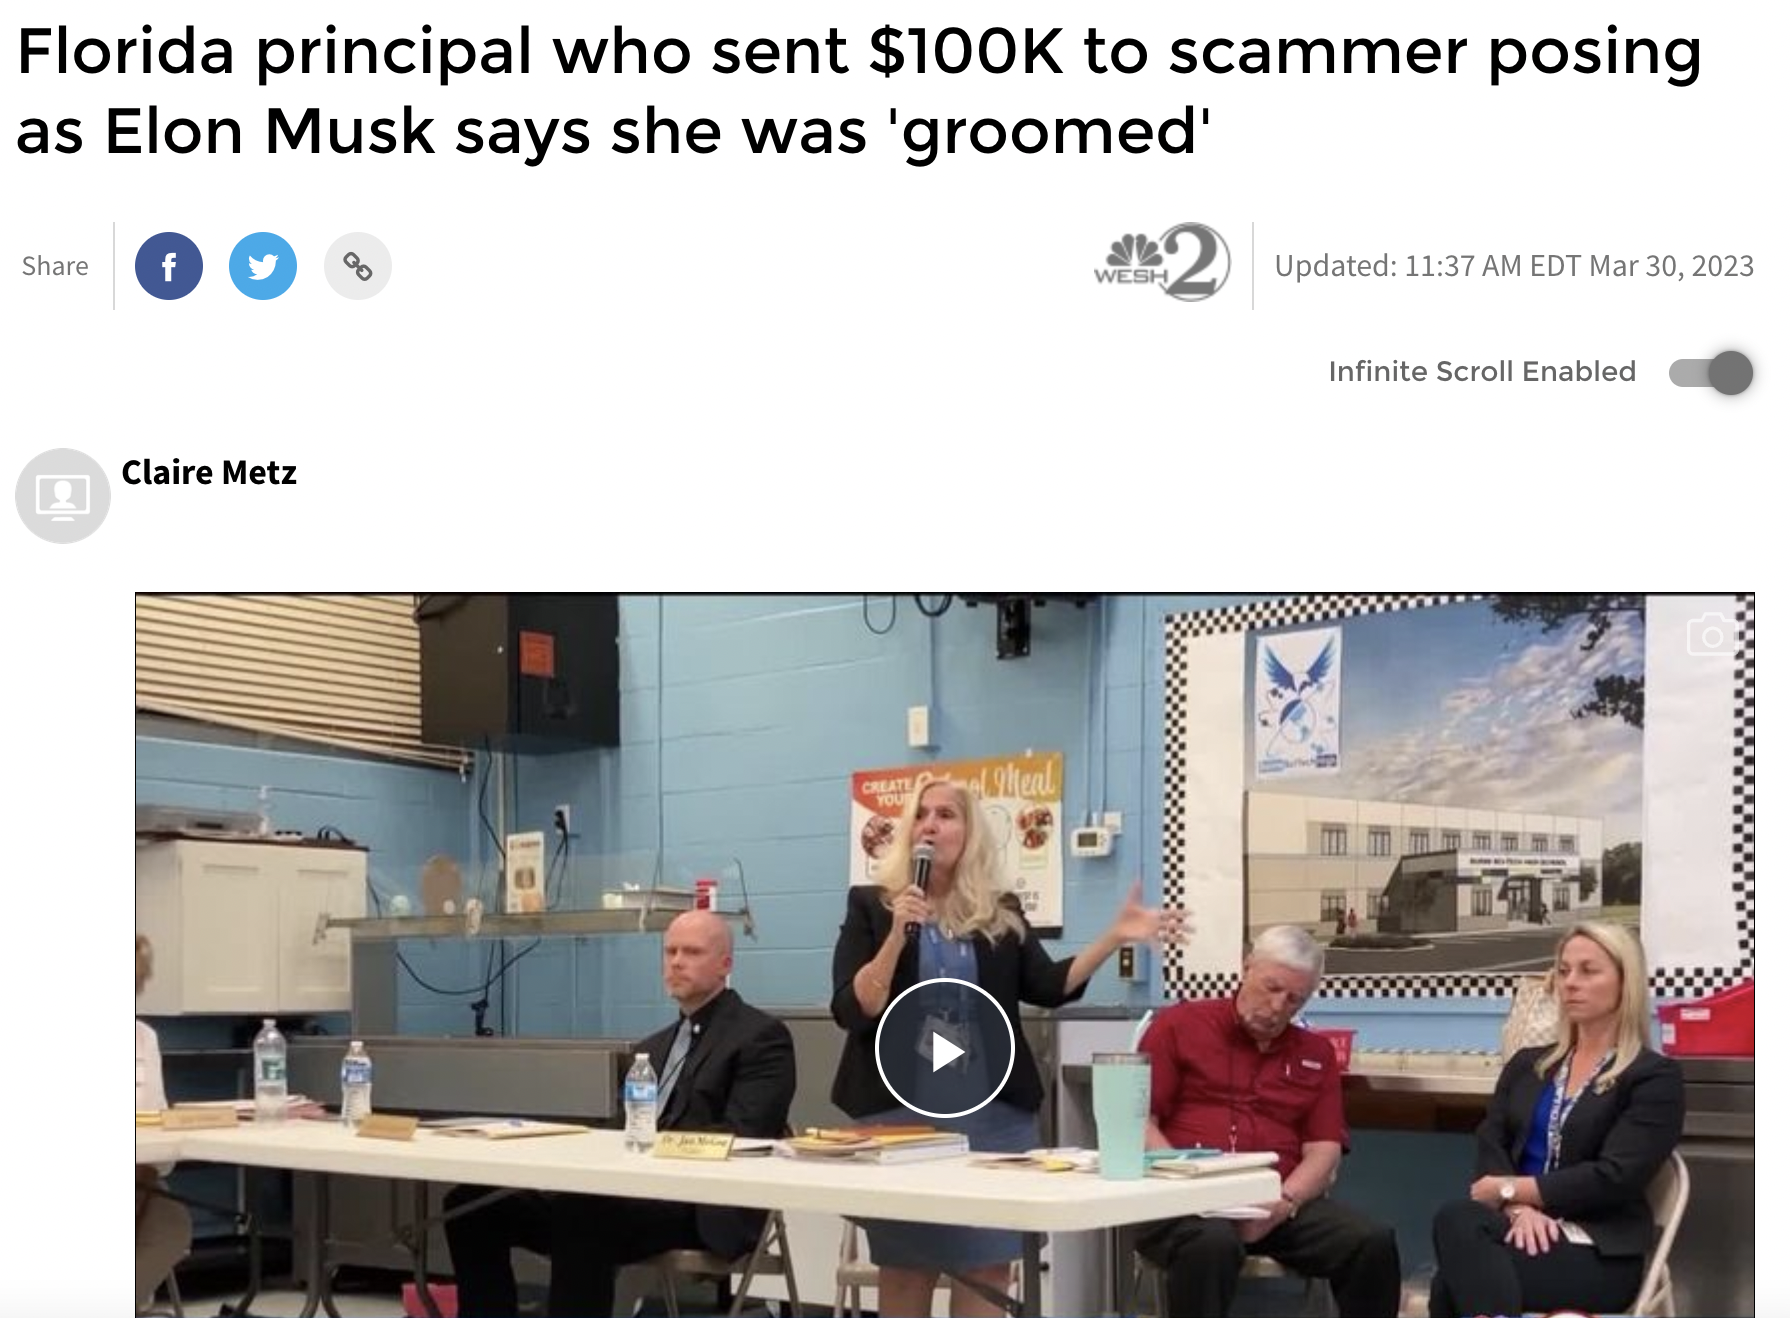 presentation - Florida principal who sent $ to scammer posing as Elon Musk says she was 'groomed' f Claire Metz Steal Wesh Updated Edt Infinite Scroll Enabled